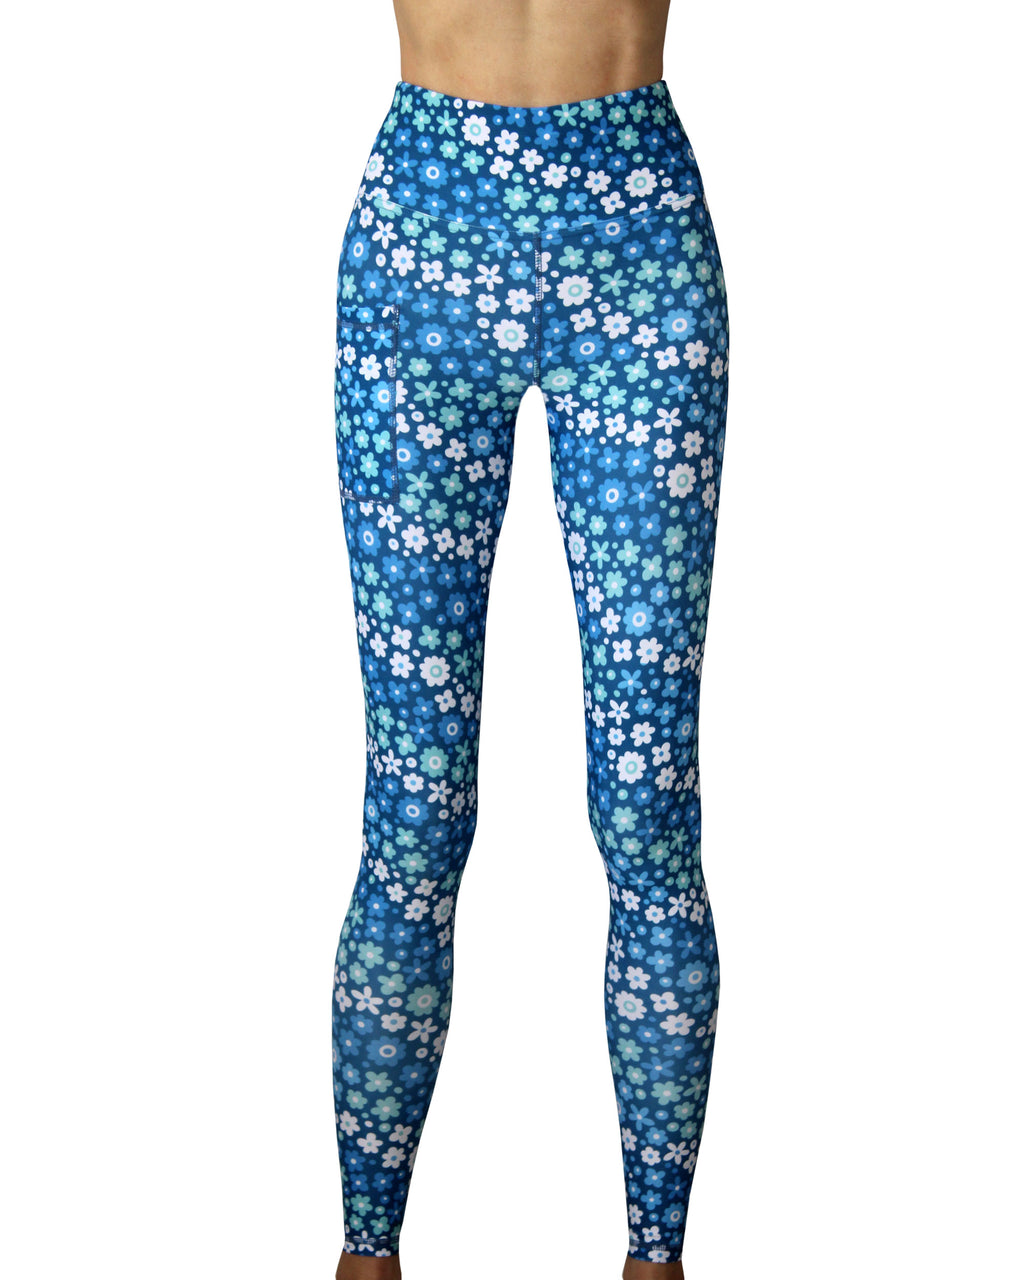 Vivolicious blue women's running and gym leggings. These pants are made in Cape Town.